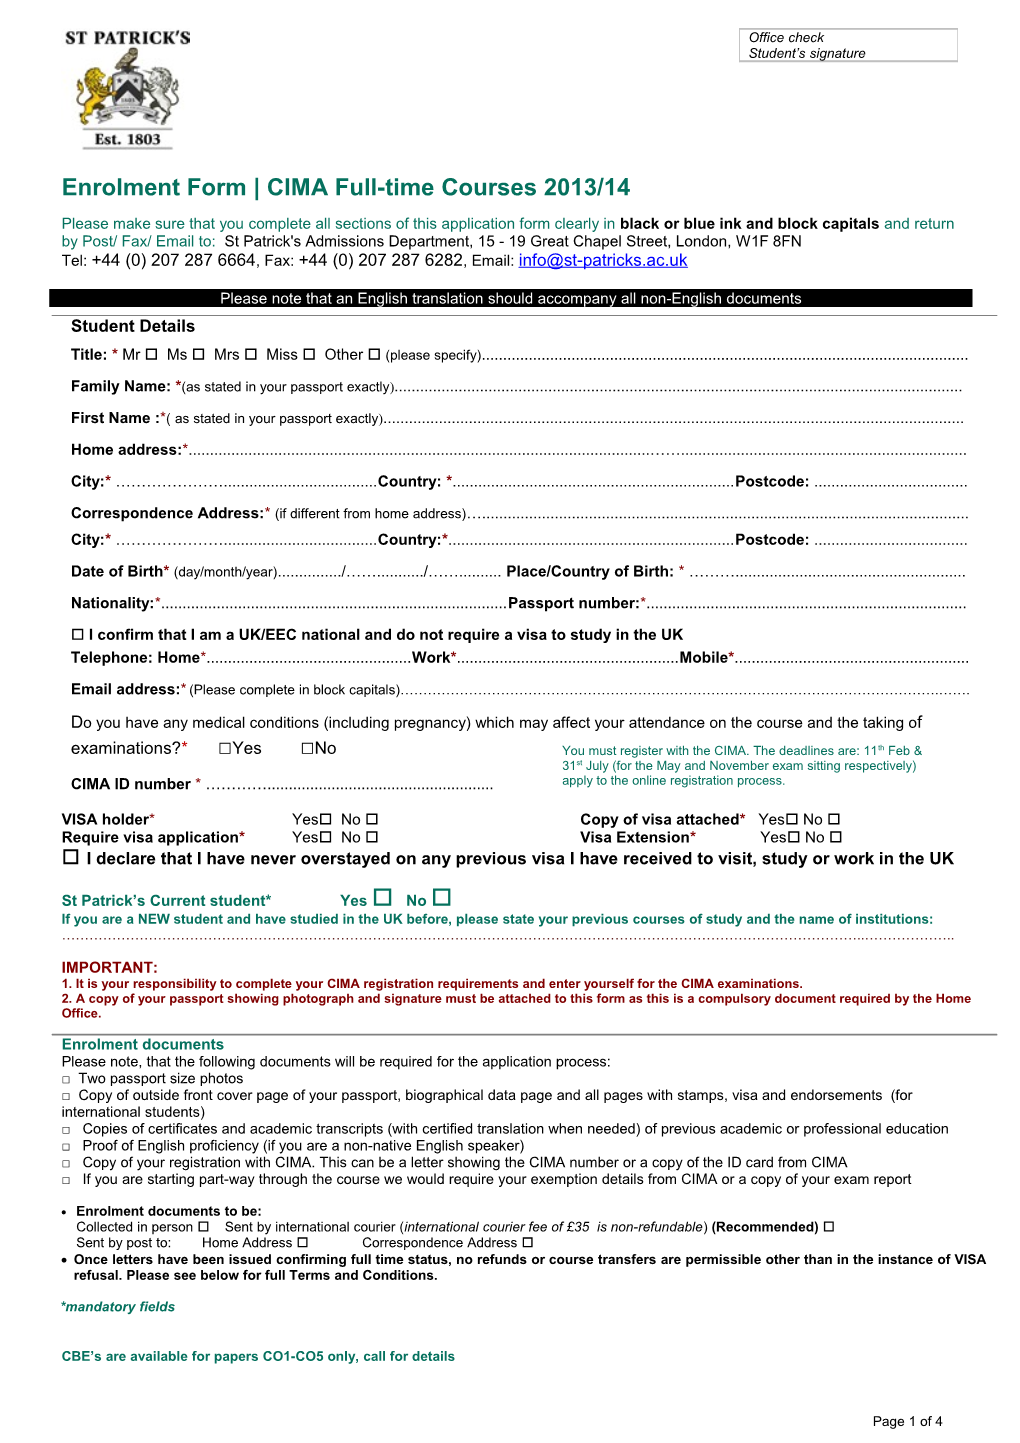 Please Make Sure That You Complete All Sections of This Application Form and Return It